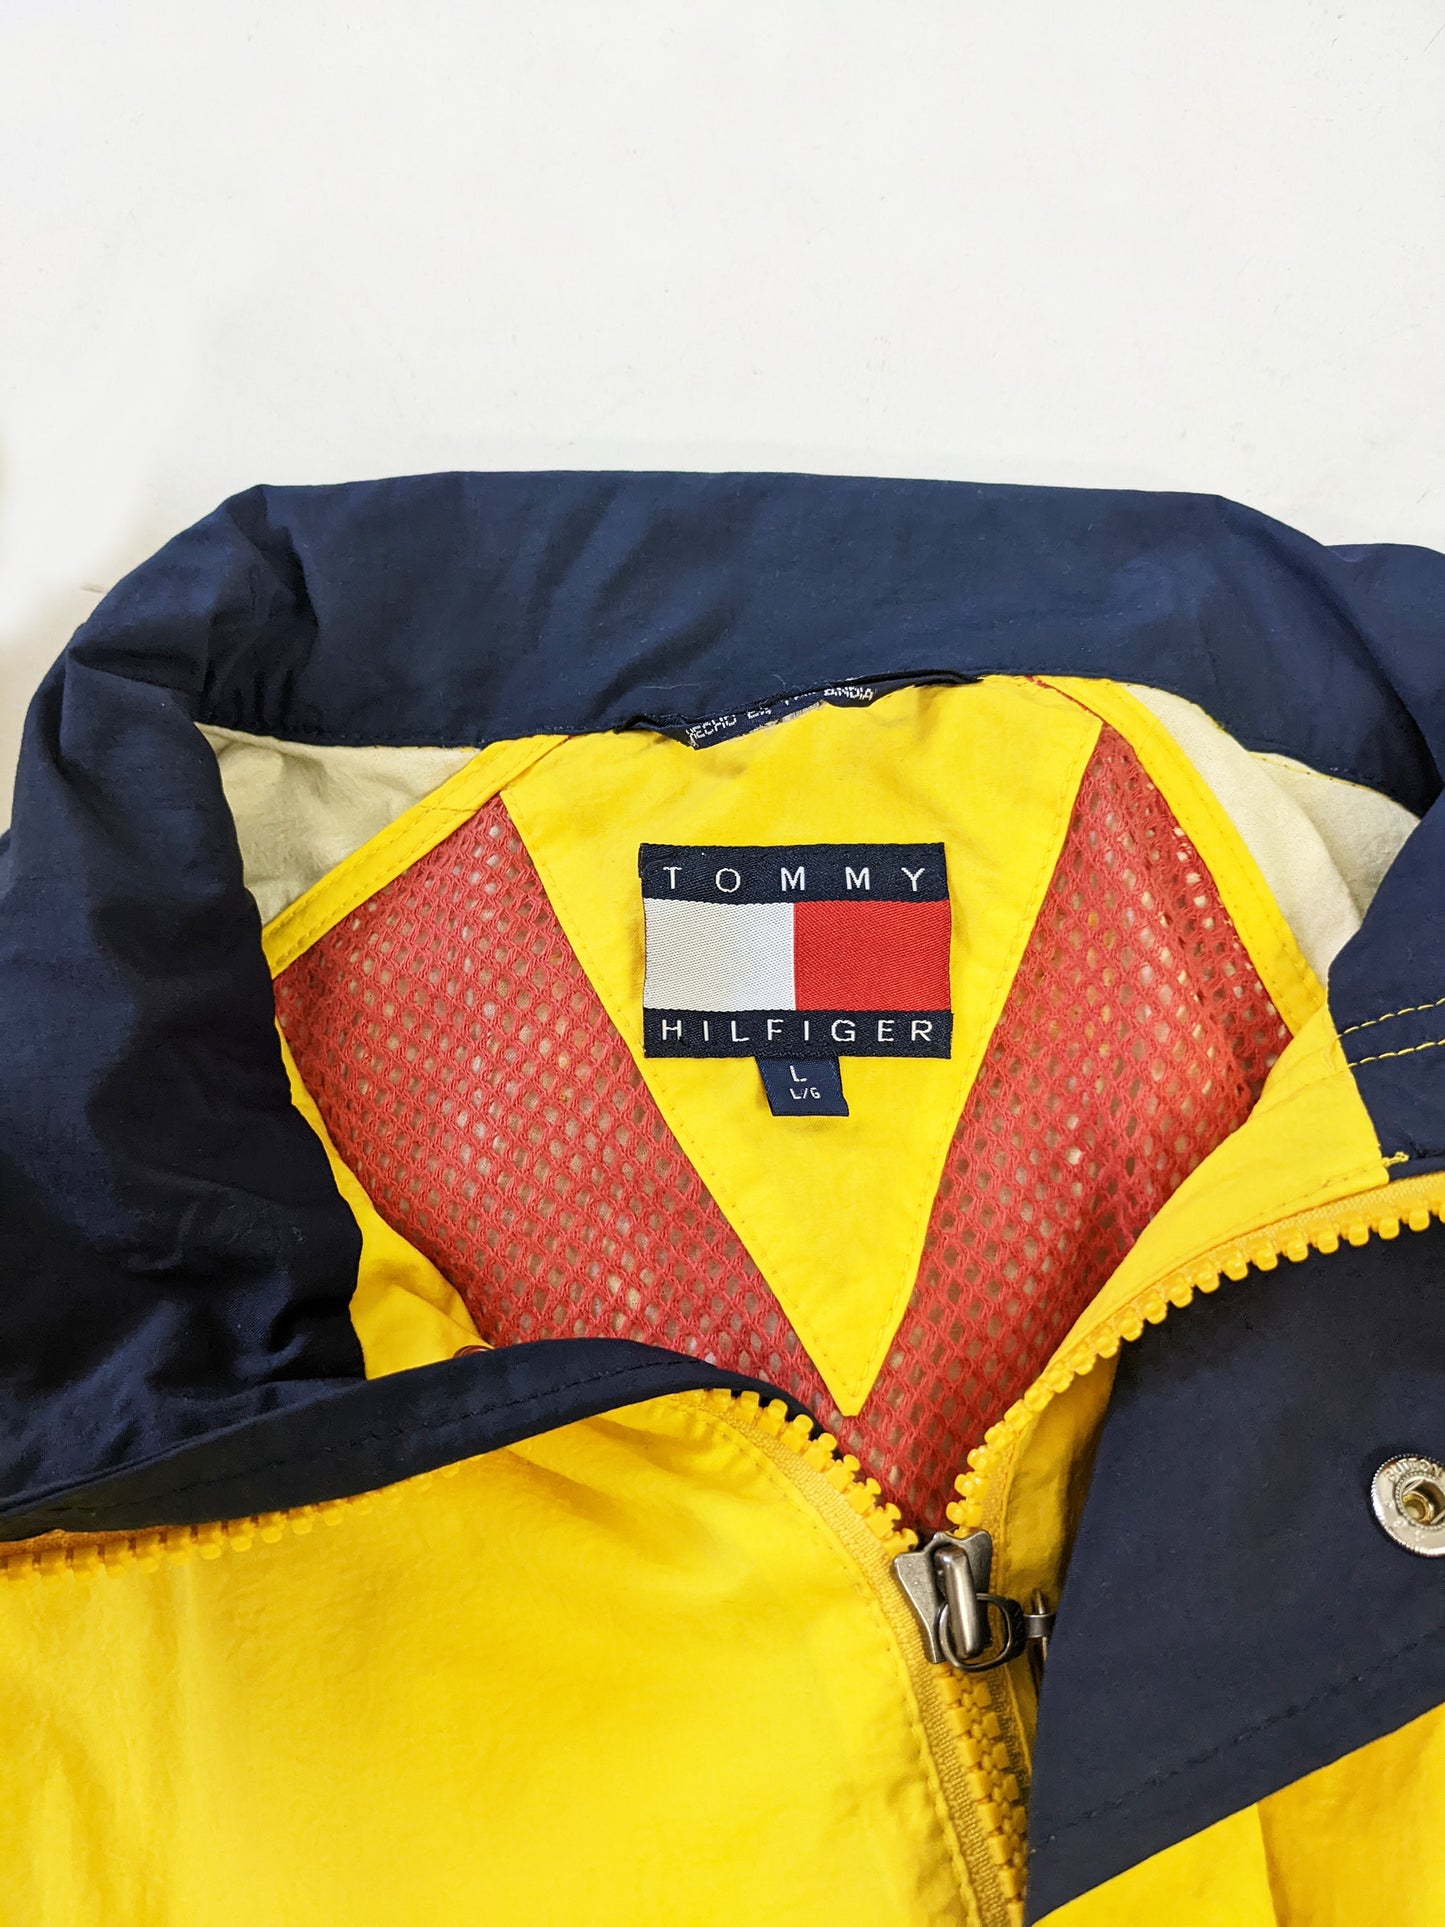 Tommy Hilfiger Vintage Mens Yellow Sailing Style Jacket, 1990s